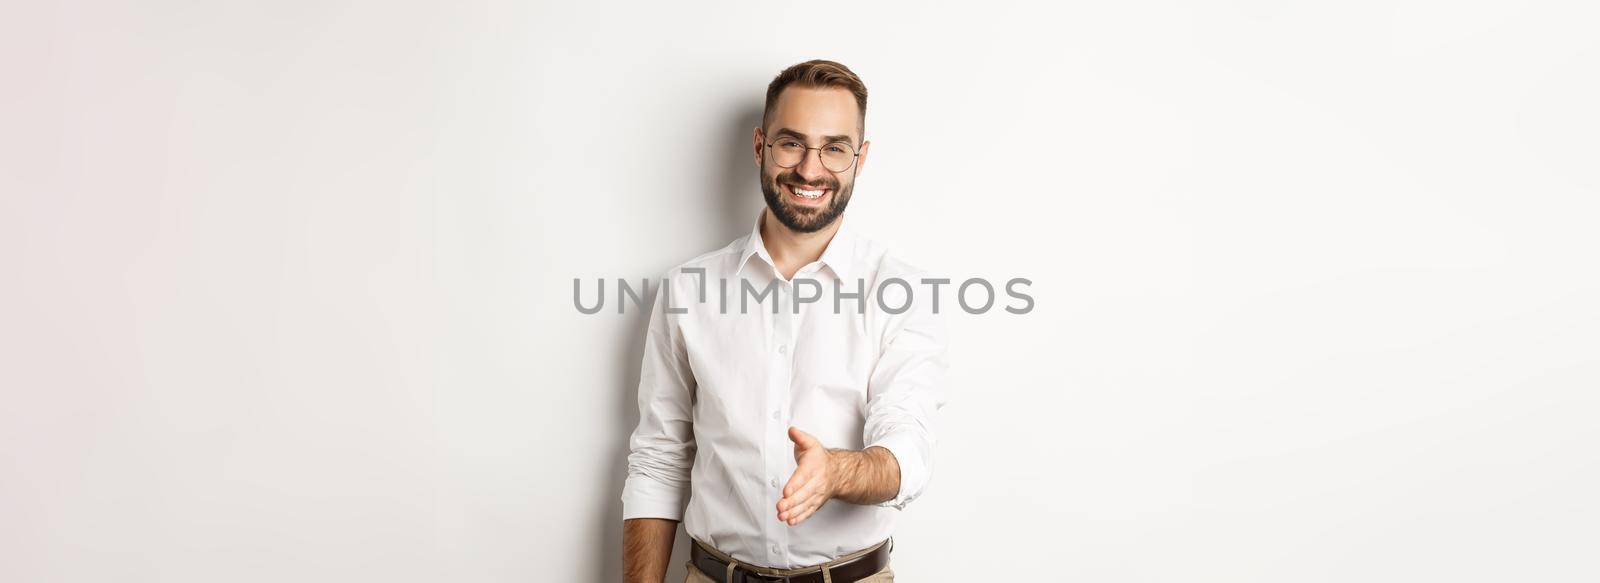 Confident businessman extending hand for handshake, greeting business partner and smiling, standing over white background.